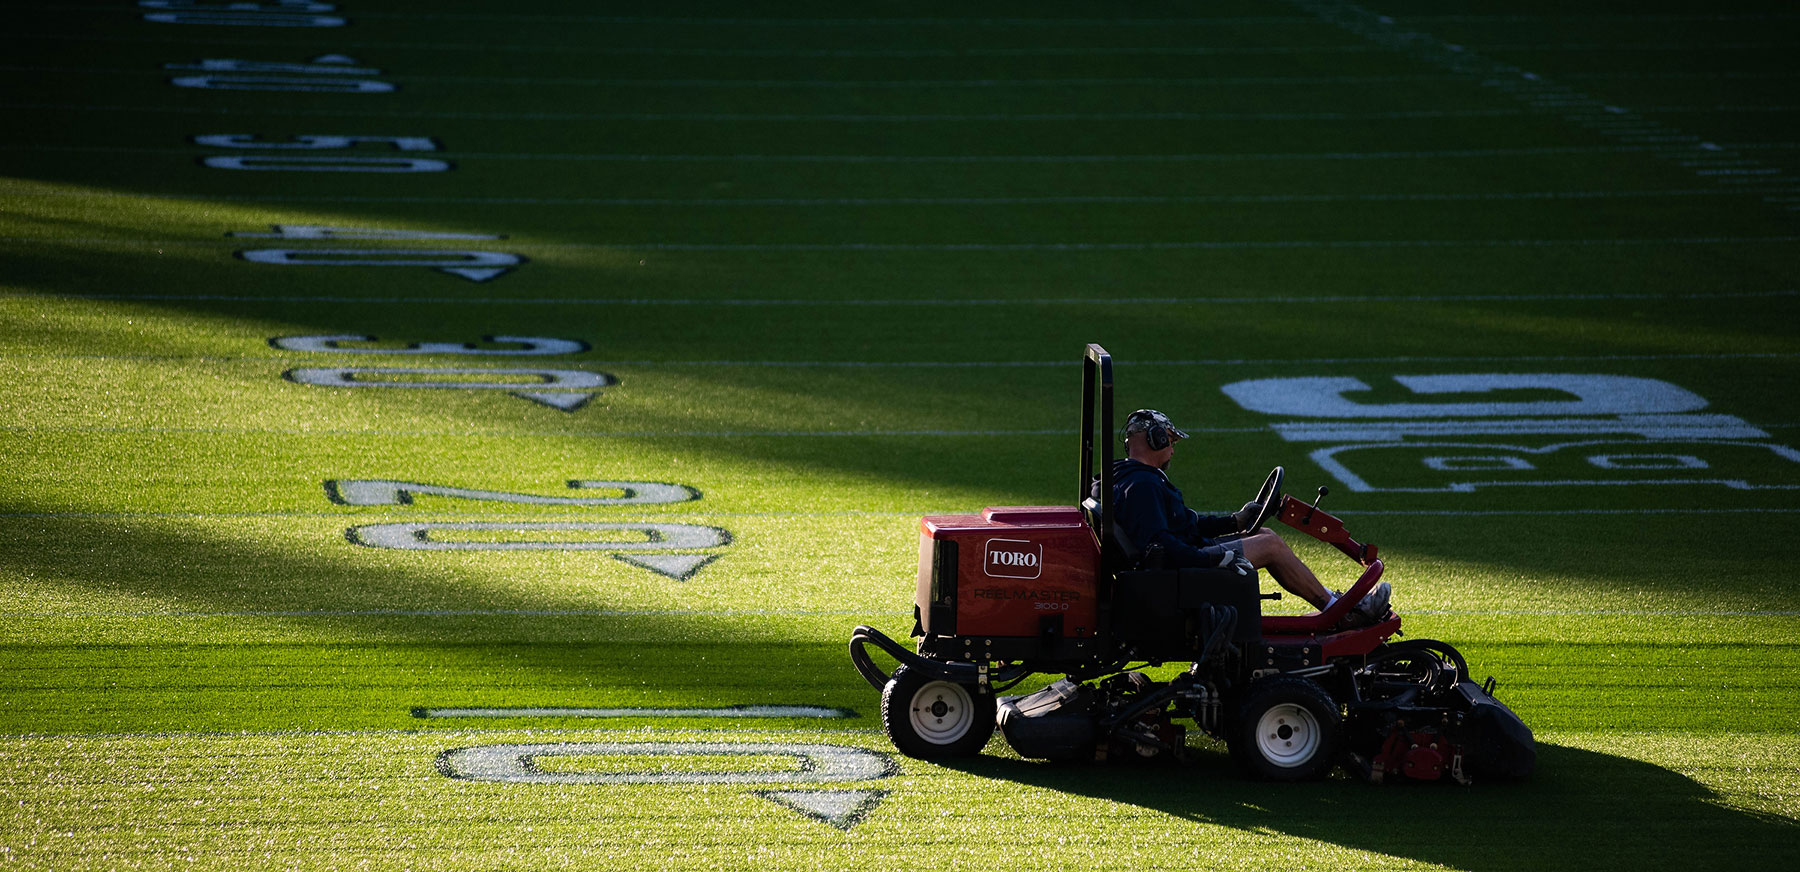 A groundskeeper riding a red Toro lawnmower mows grass along the 10 yard line at Beaver Stadium.